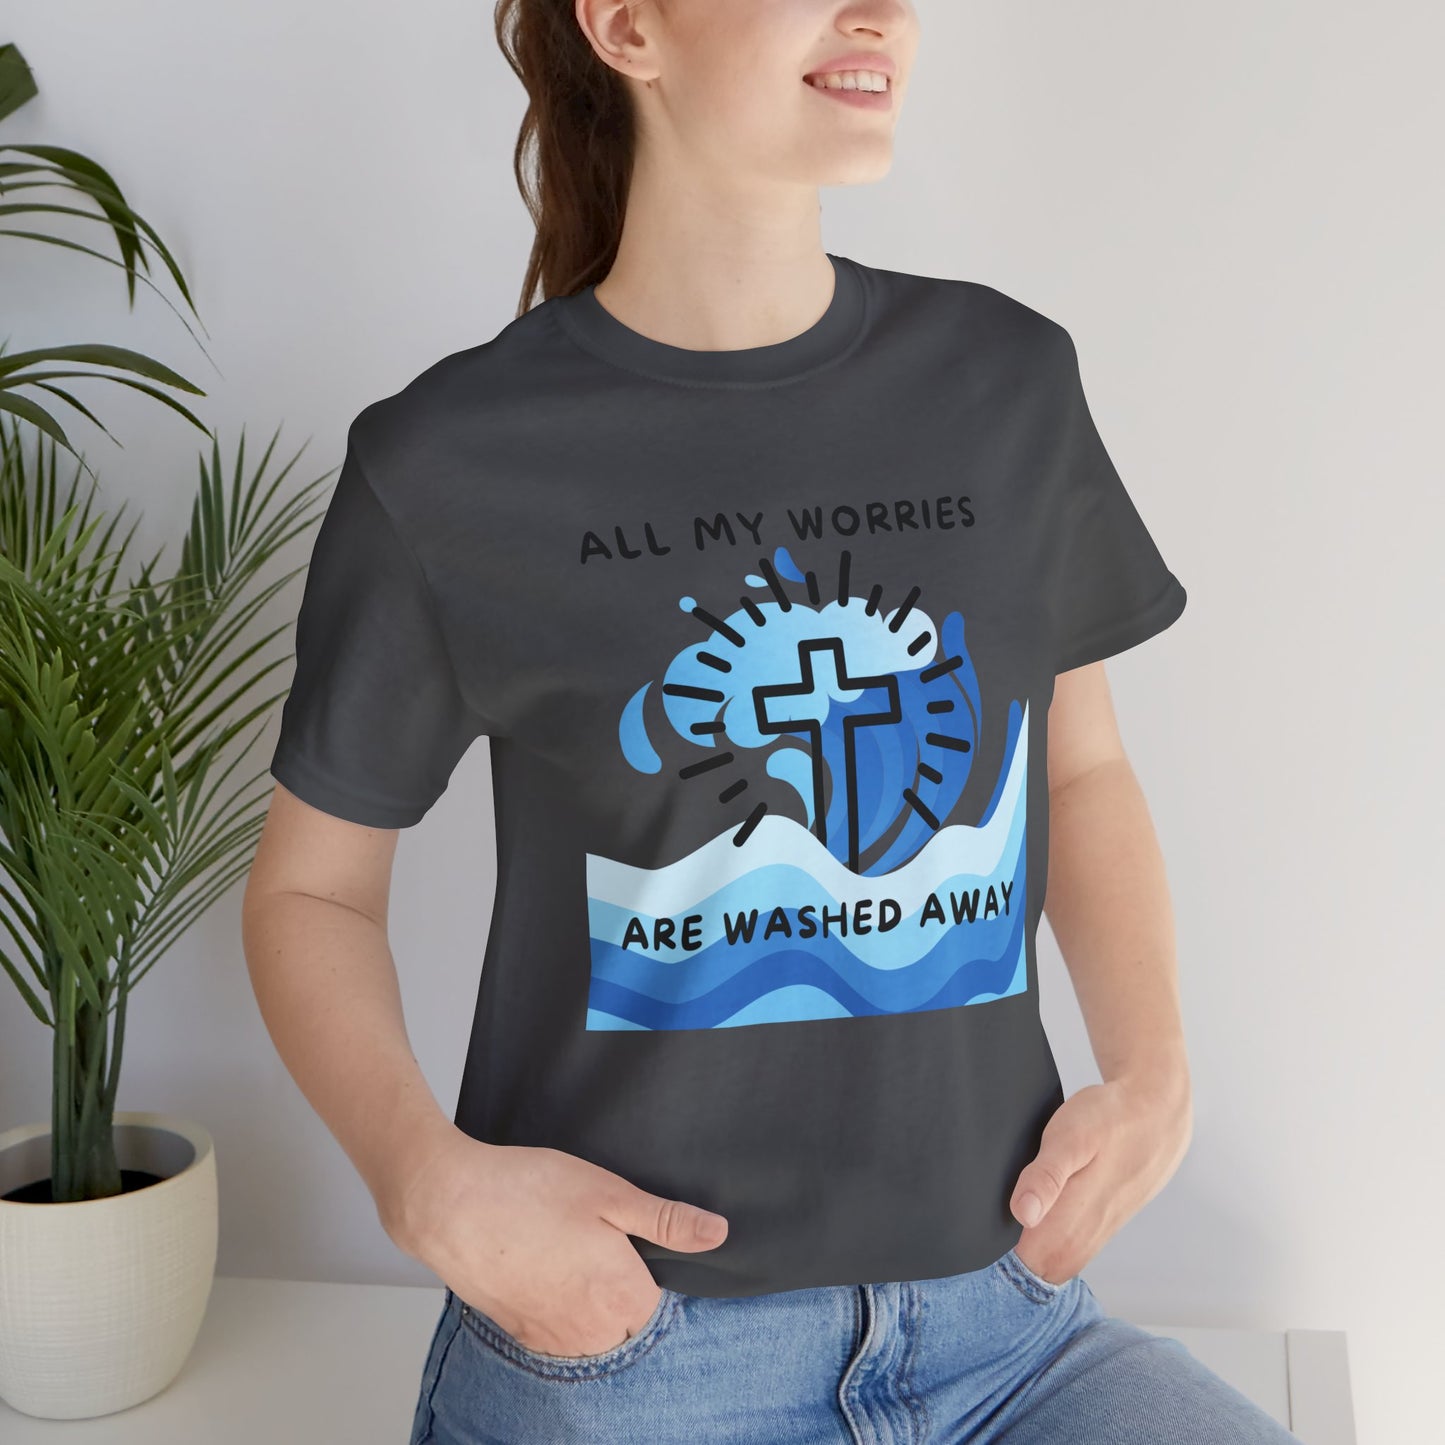 Christ Washed My Worries Away - T-Shirt